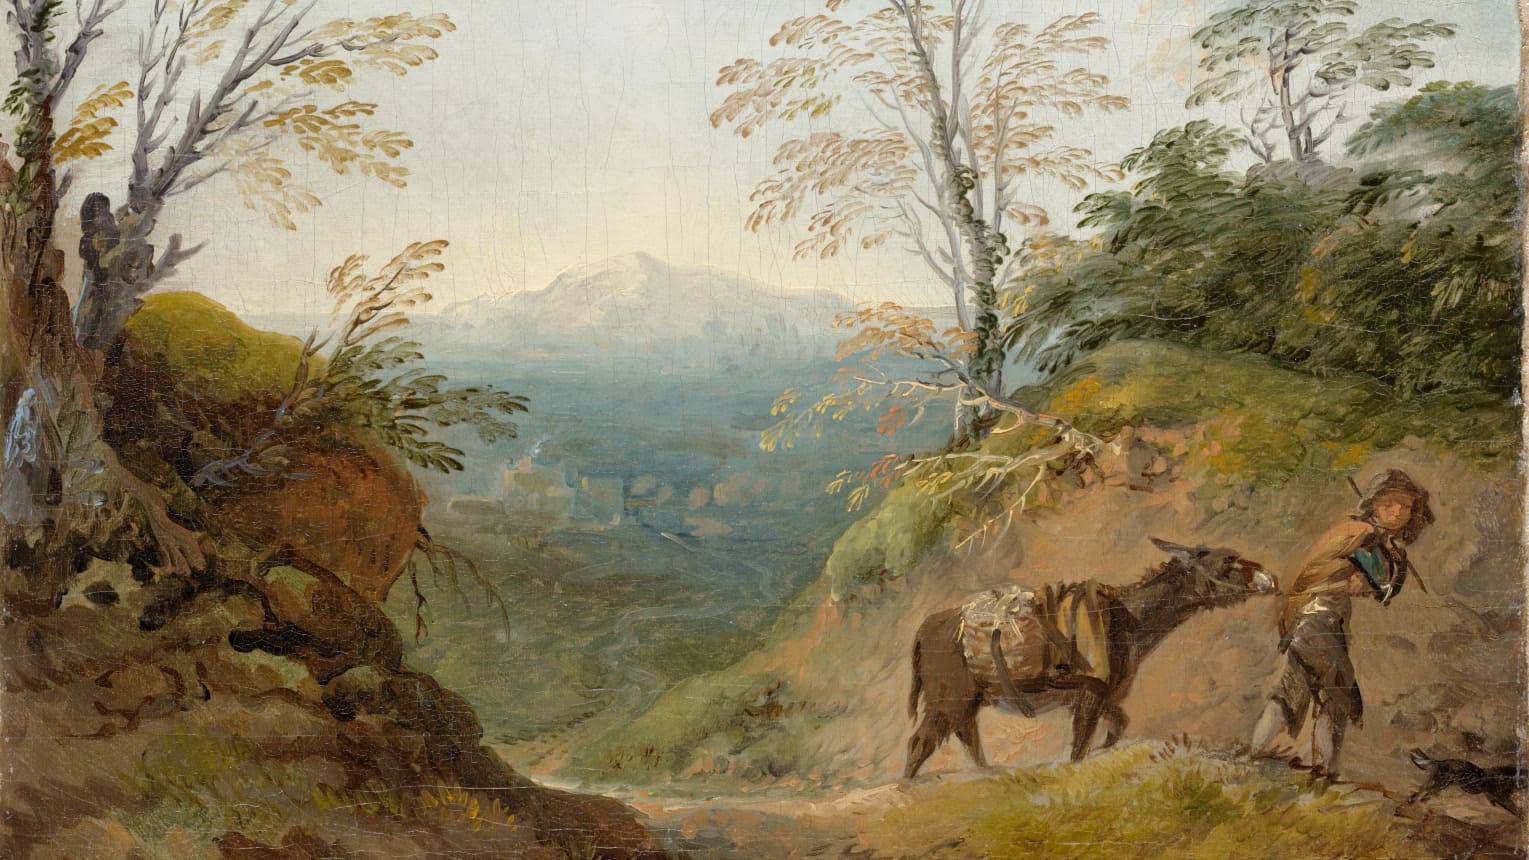 Thomas Gainsborough, Wooded Landscape with a Boy Leading a Donkey and Dog, and an Extensive Panorama with Buildings and Distant Hills, early 1760s, oil on canvas.